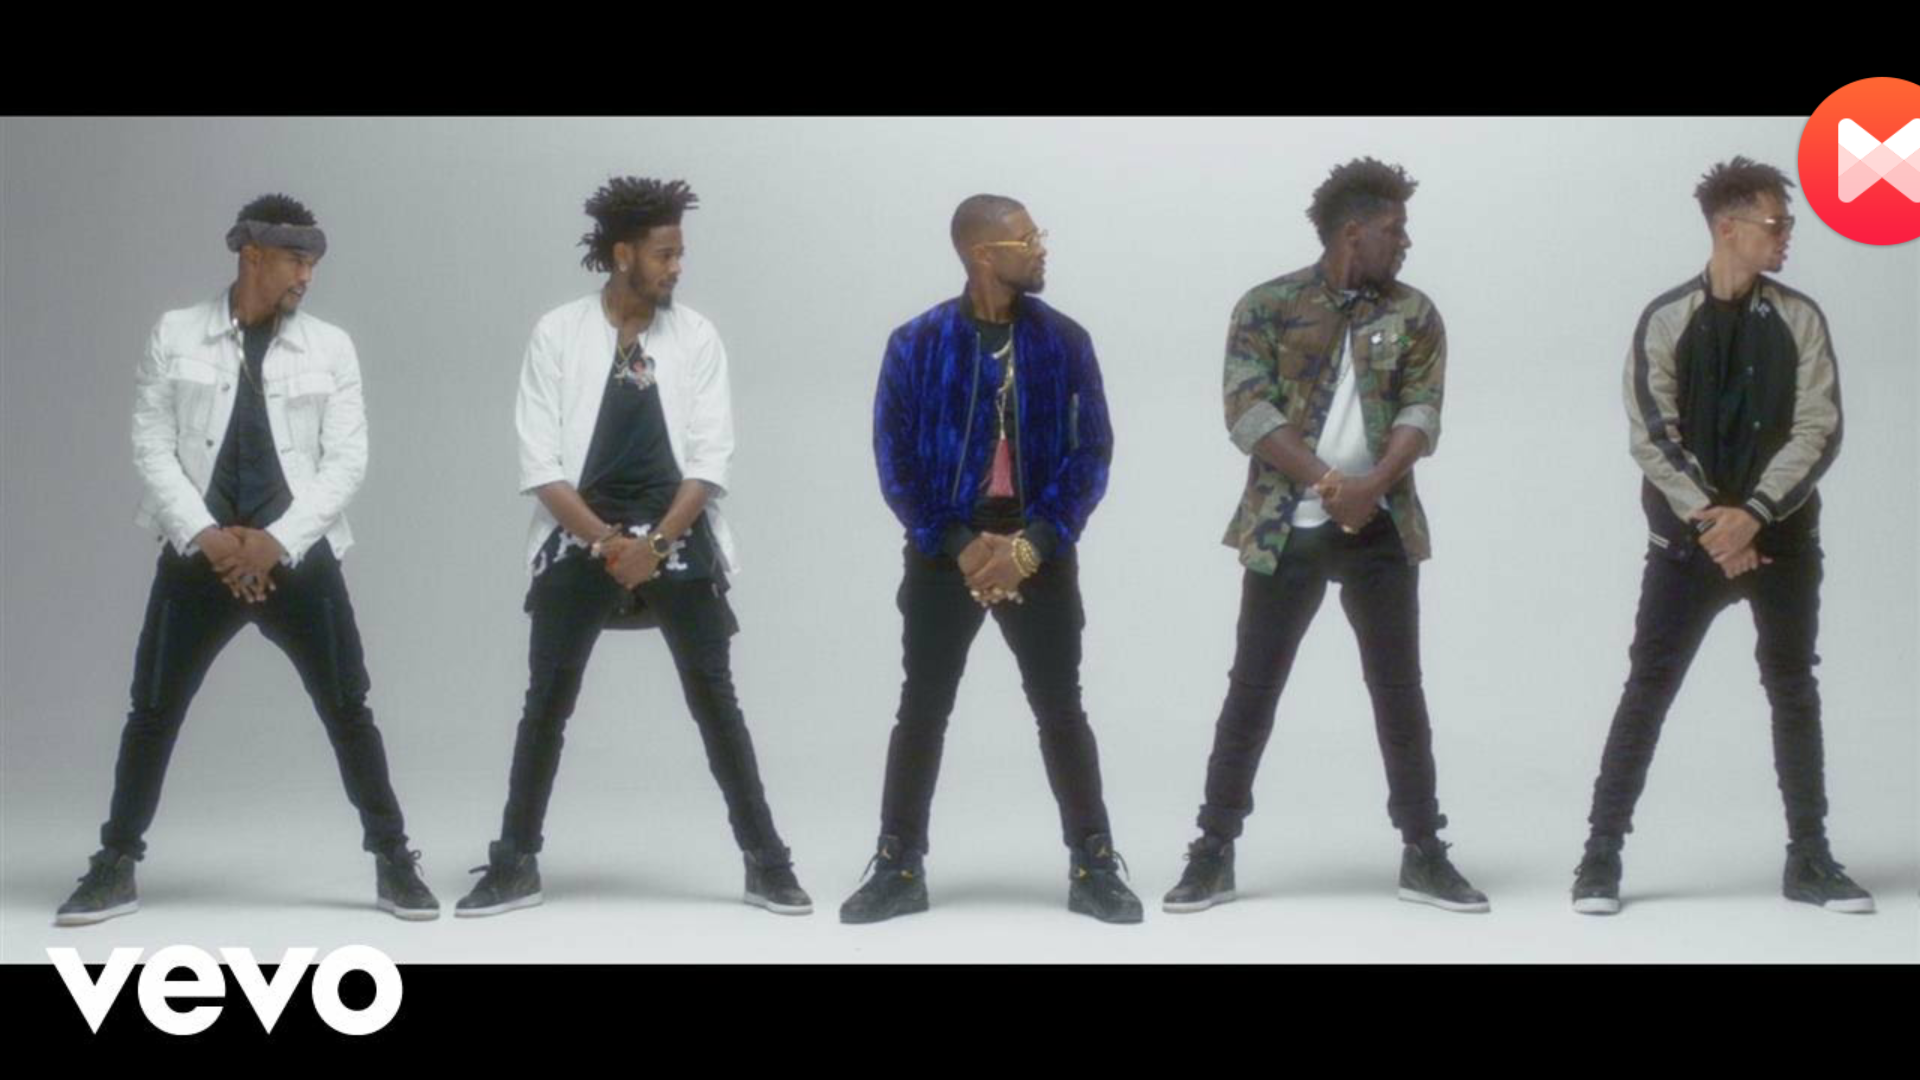 Usher Showcases Some Elaborate Dance Moves in “No Limit” Music Video with Young Thug